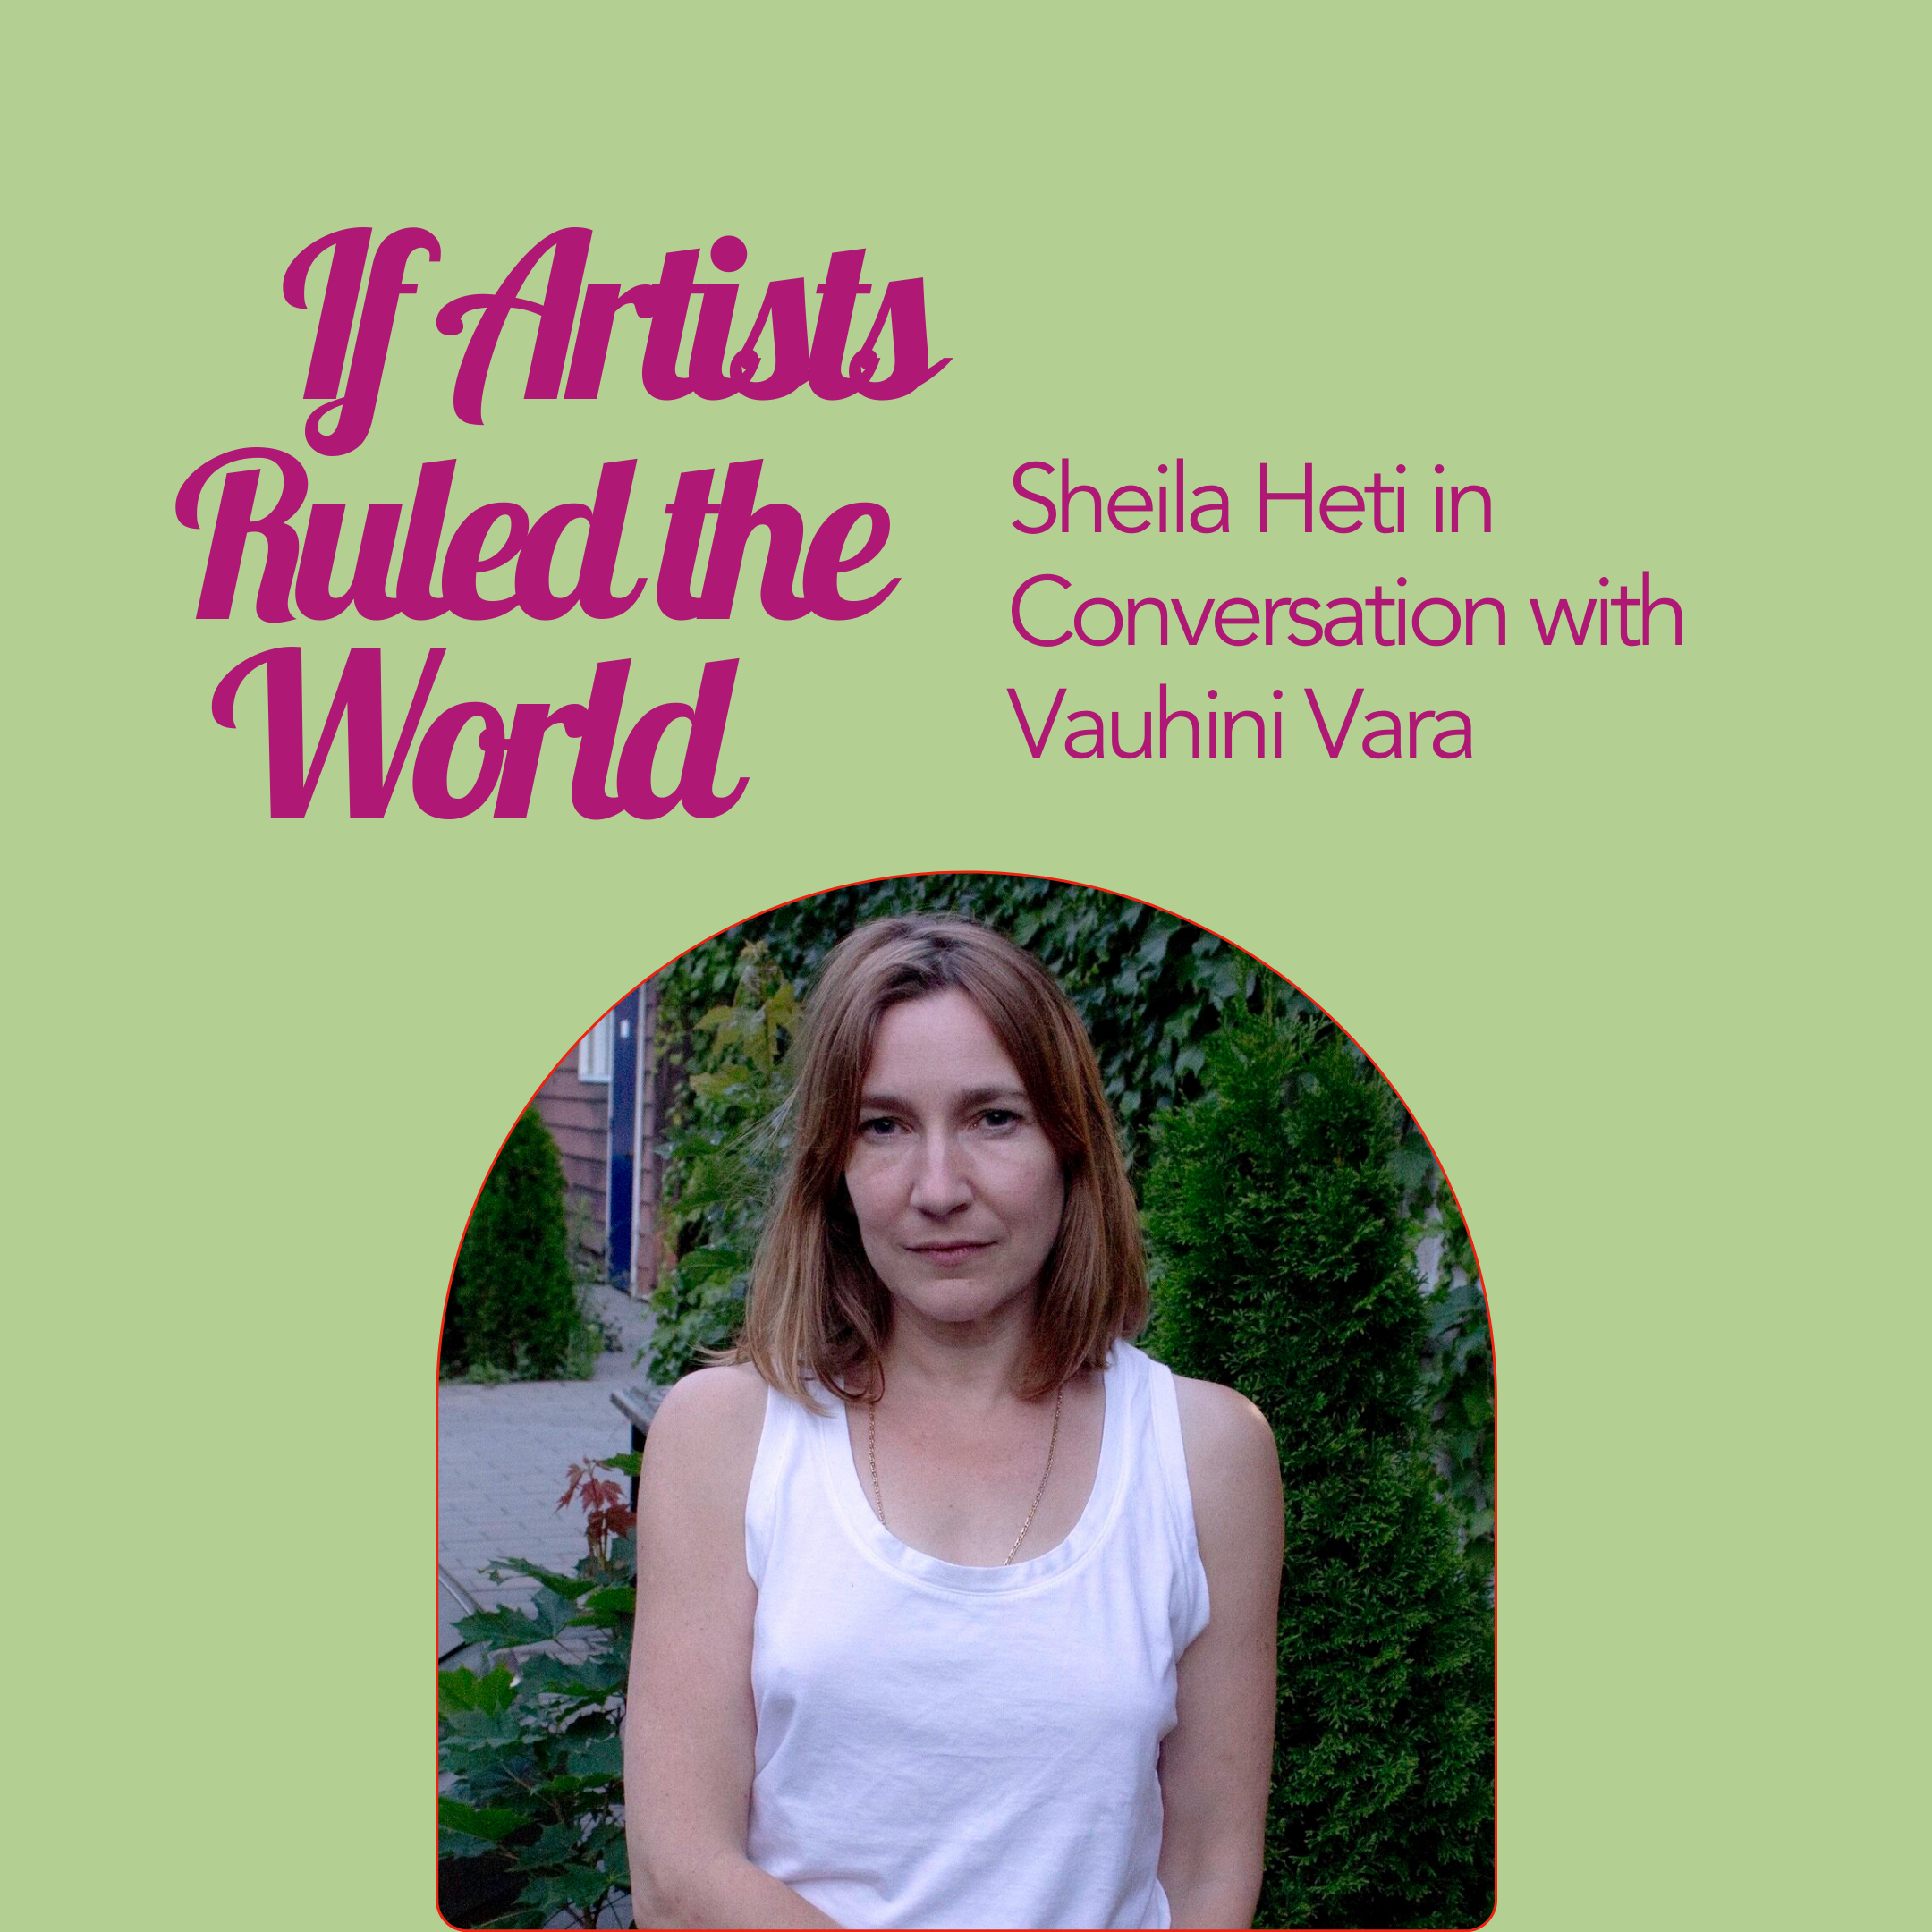 Green design featuring a soft portrait of an author, Sheila Heti. Pink text on the image reads, “If Artists Ruled the World” and “Sheila Heti in Conversation with Vauhini Vara”